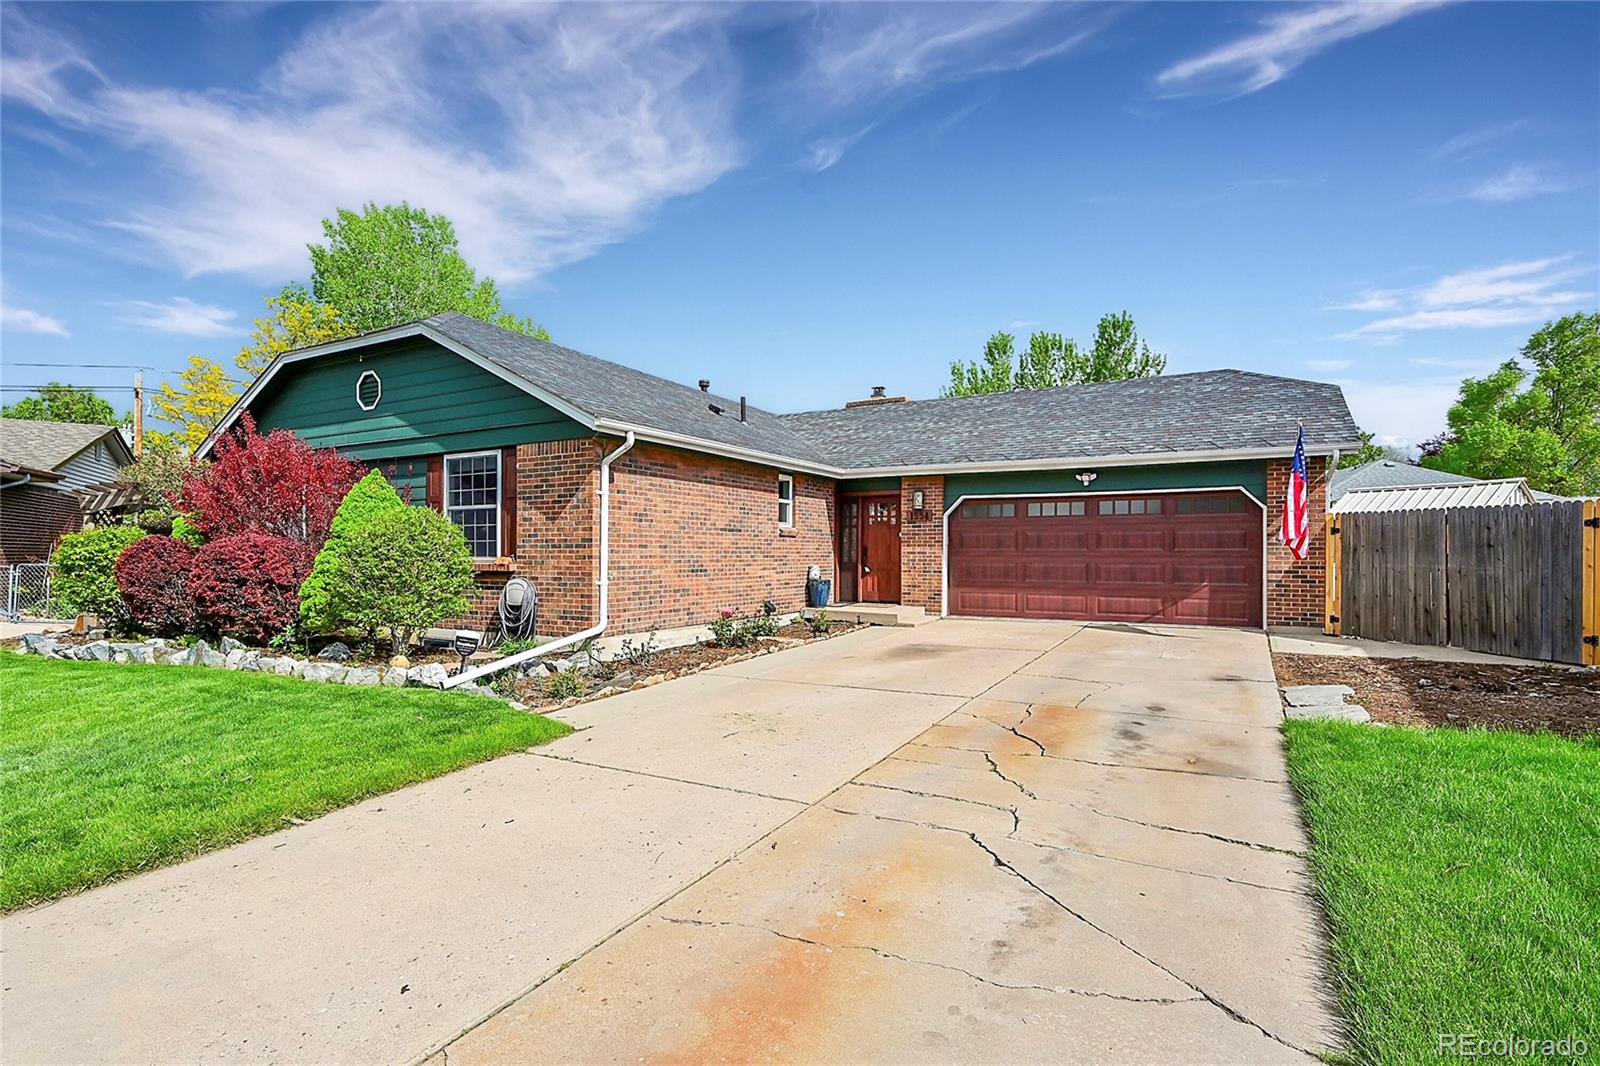 Report Image for 1554 S Flower Court,Lakewood, Colorado